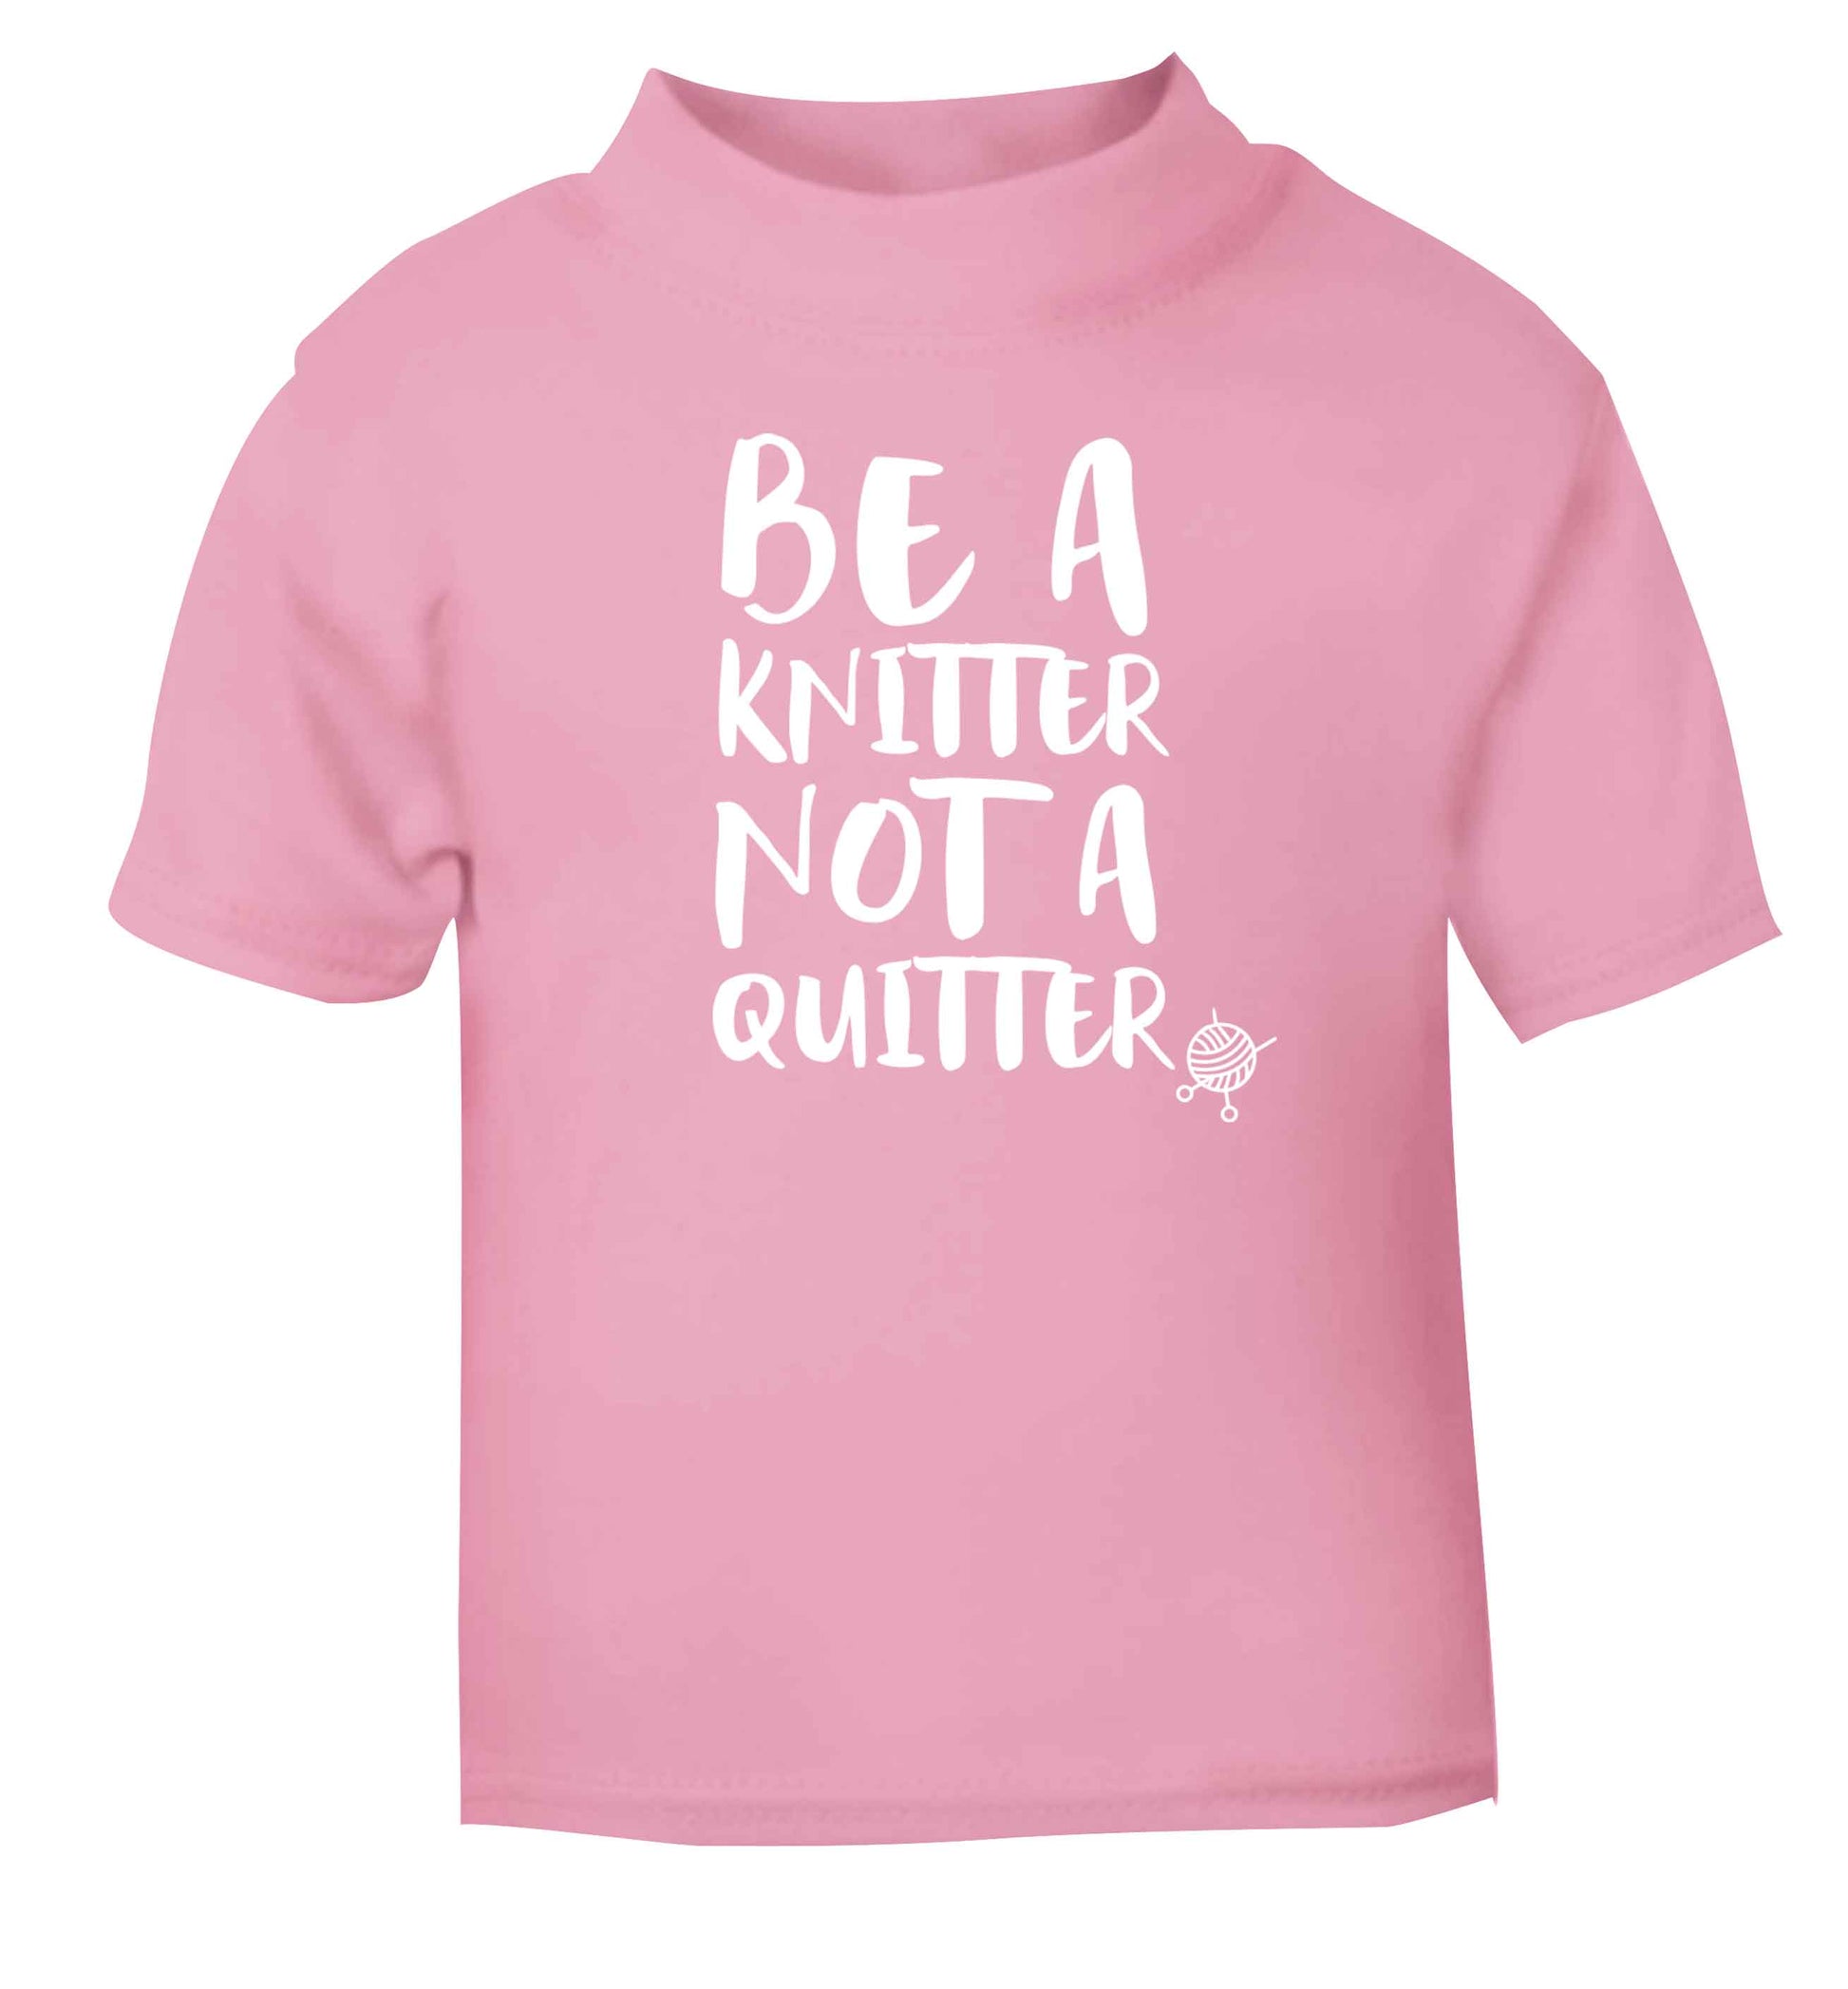 Be a knitter not a quitter light pink Baby Toddler Tshirt 2 Years